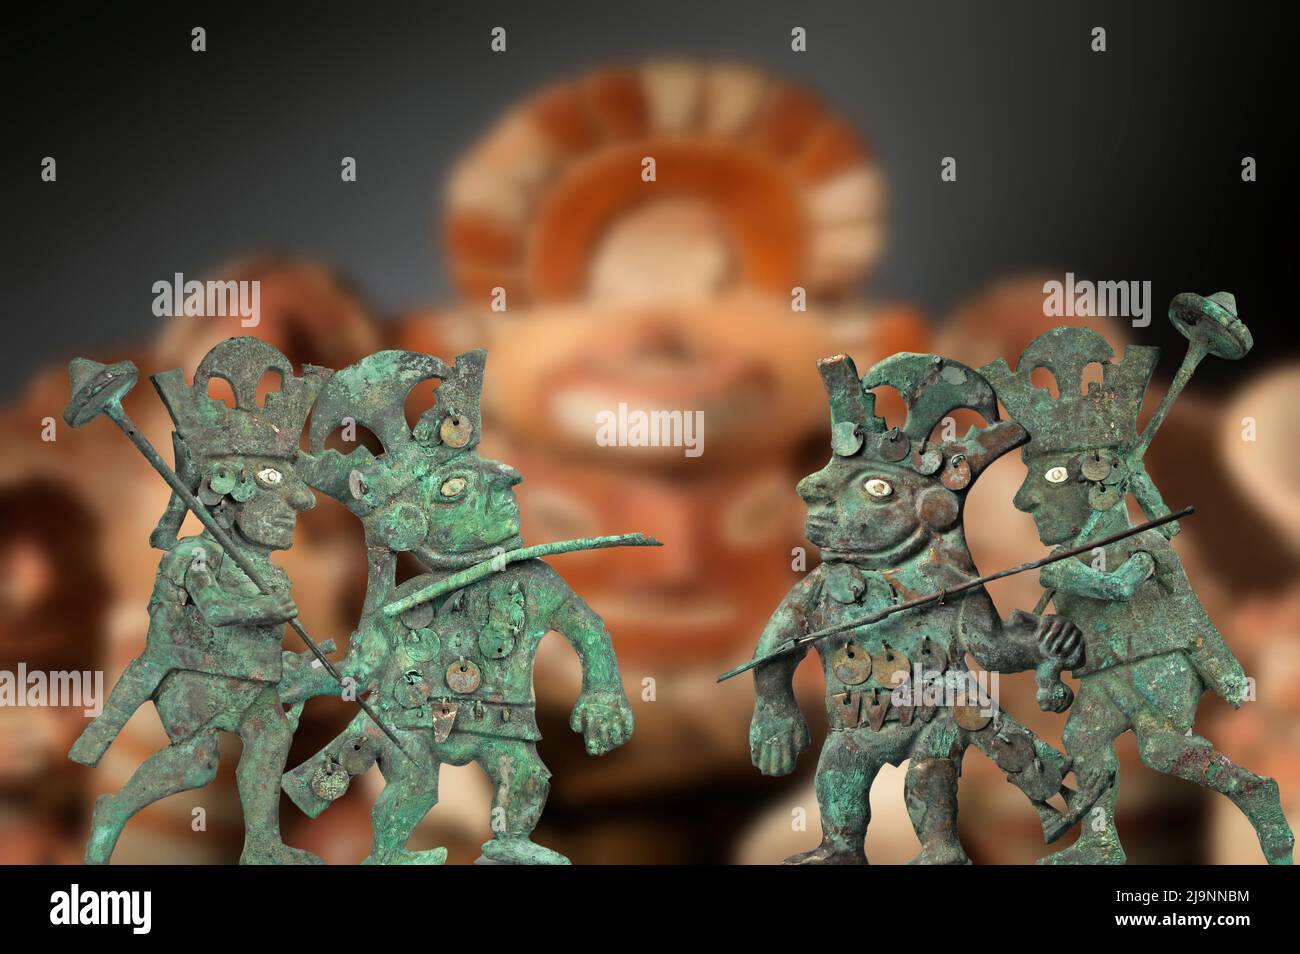 Some statuettes of Inca warriors in war gear Stock Photo